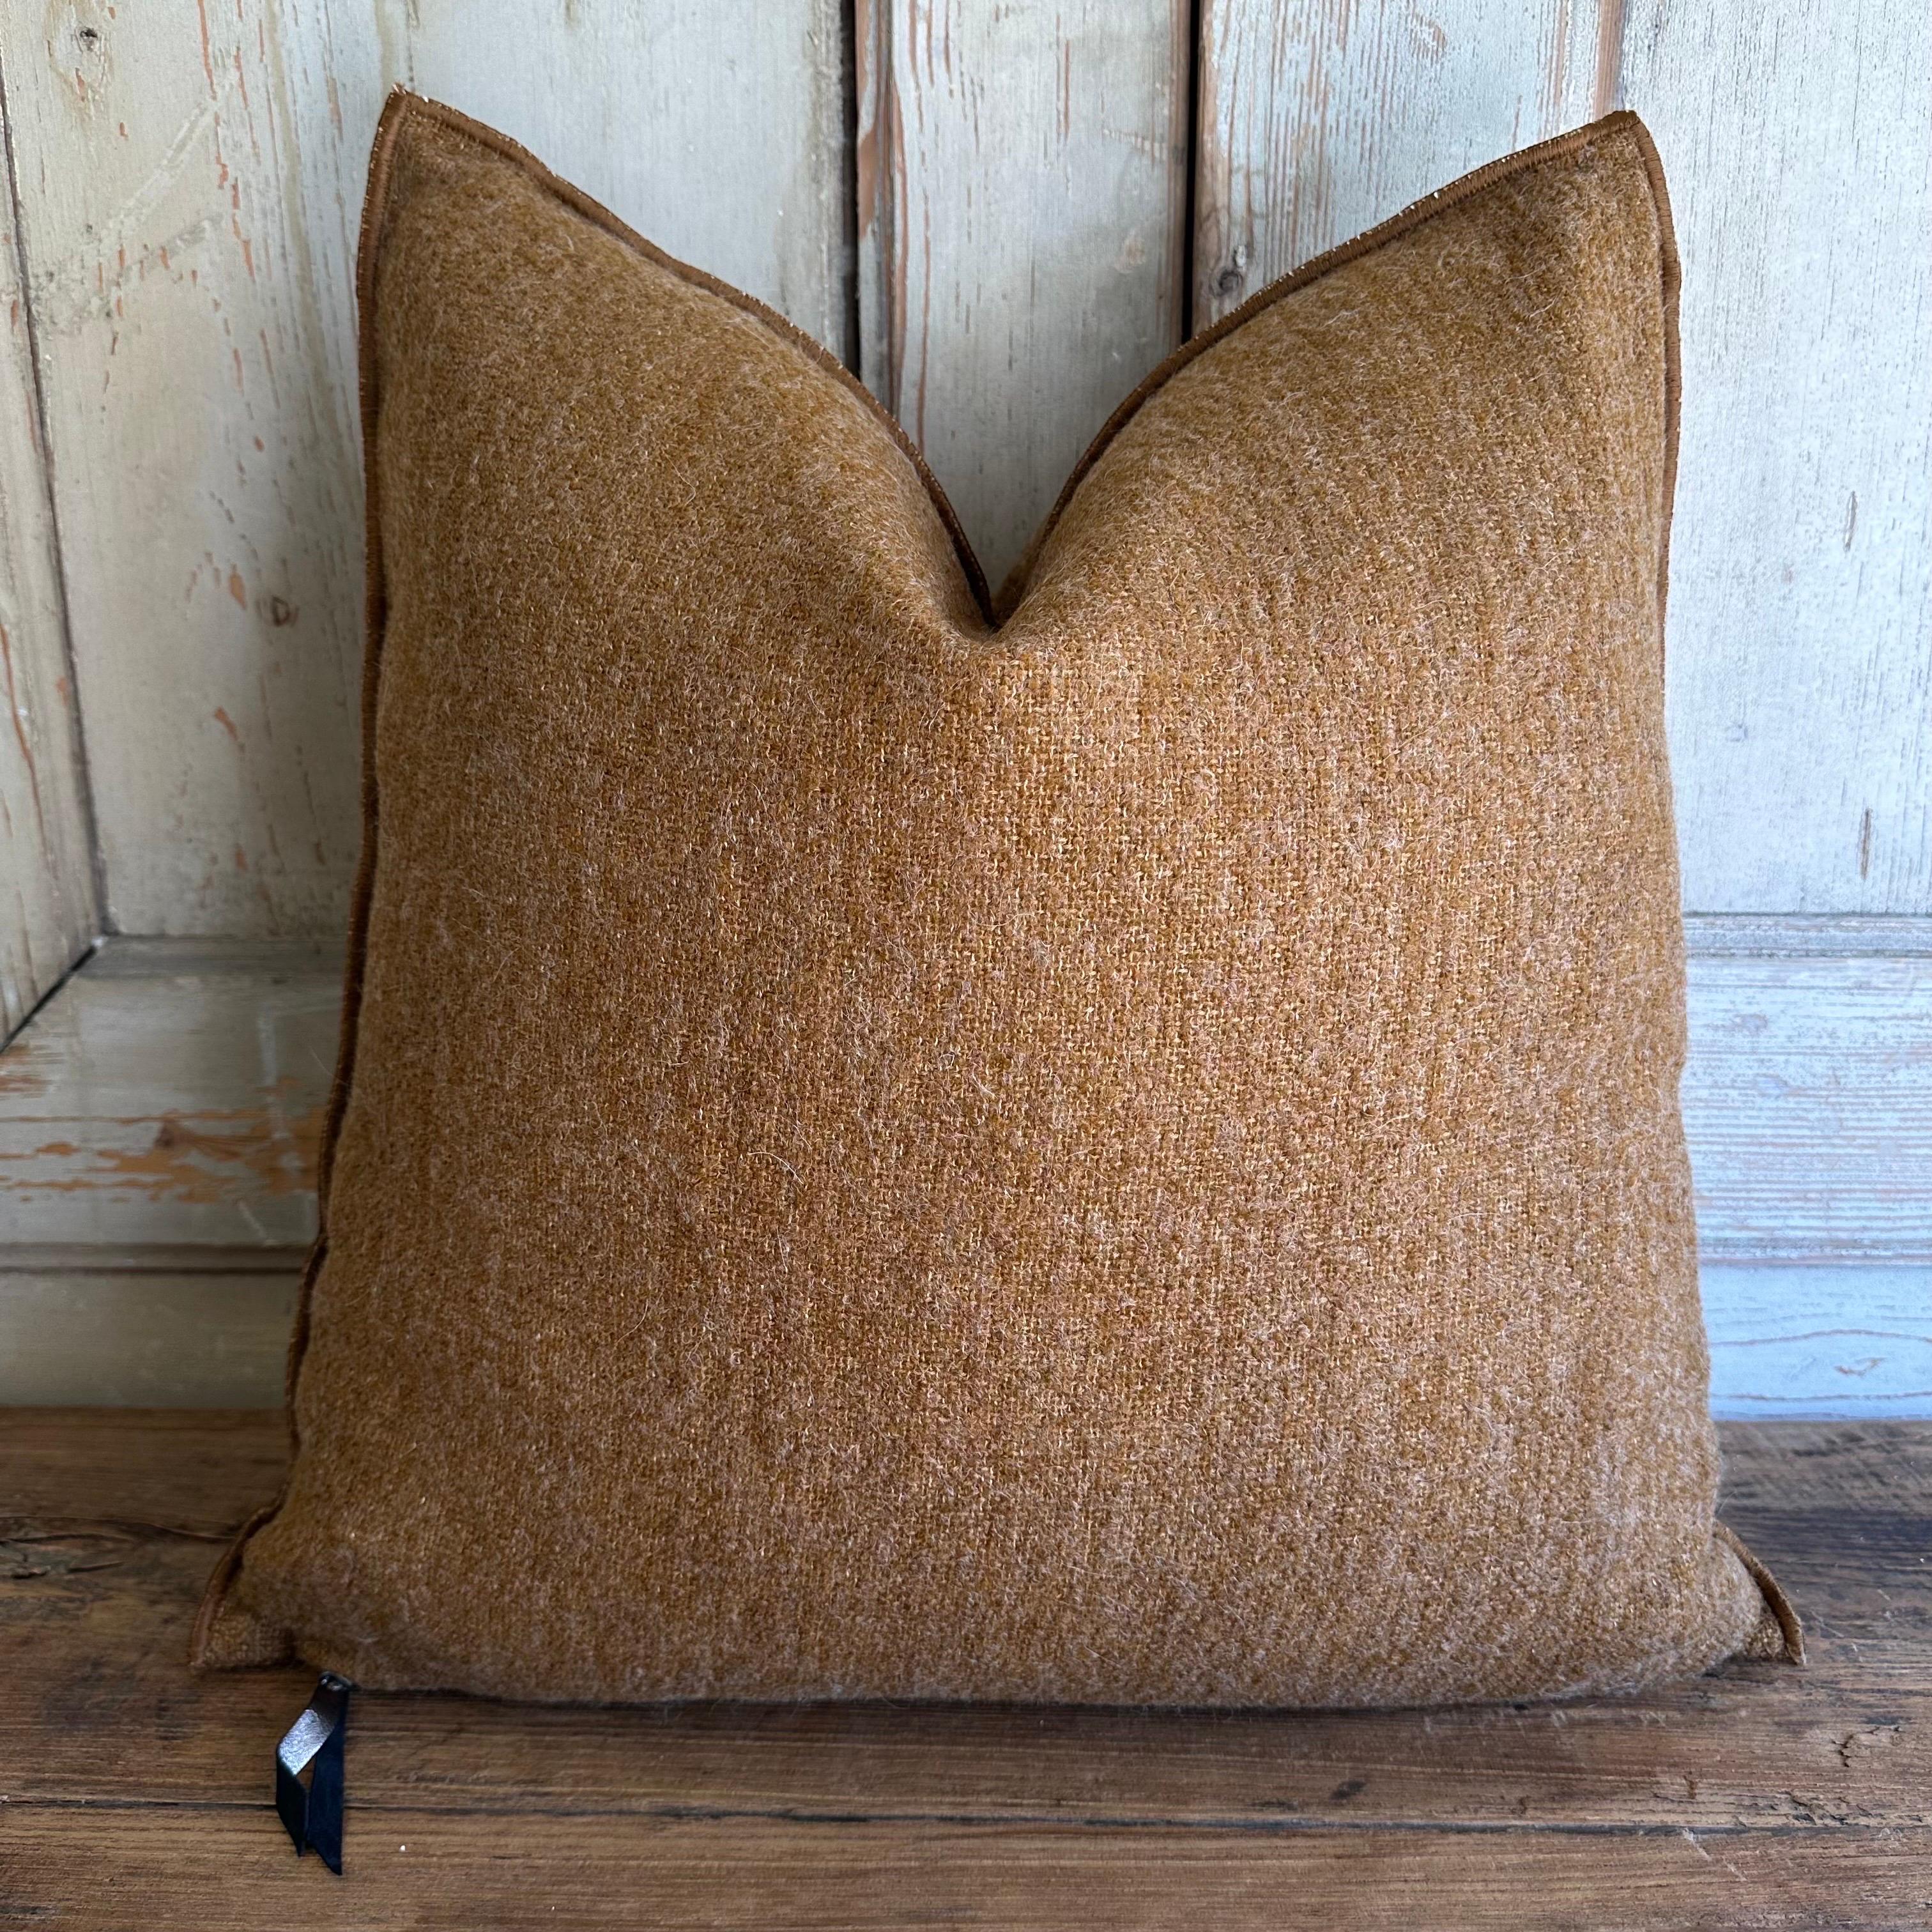 Custom wool blend accent pillow with down insert. 
Color:Havane which is a deep rust with warm brown tones, nubby boucle style pillow with a stitched edge, metal zipper closure. 
Size: 26”x26”.
Our pillows are constructed with vintage one of a kind